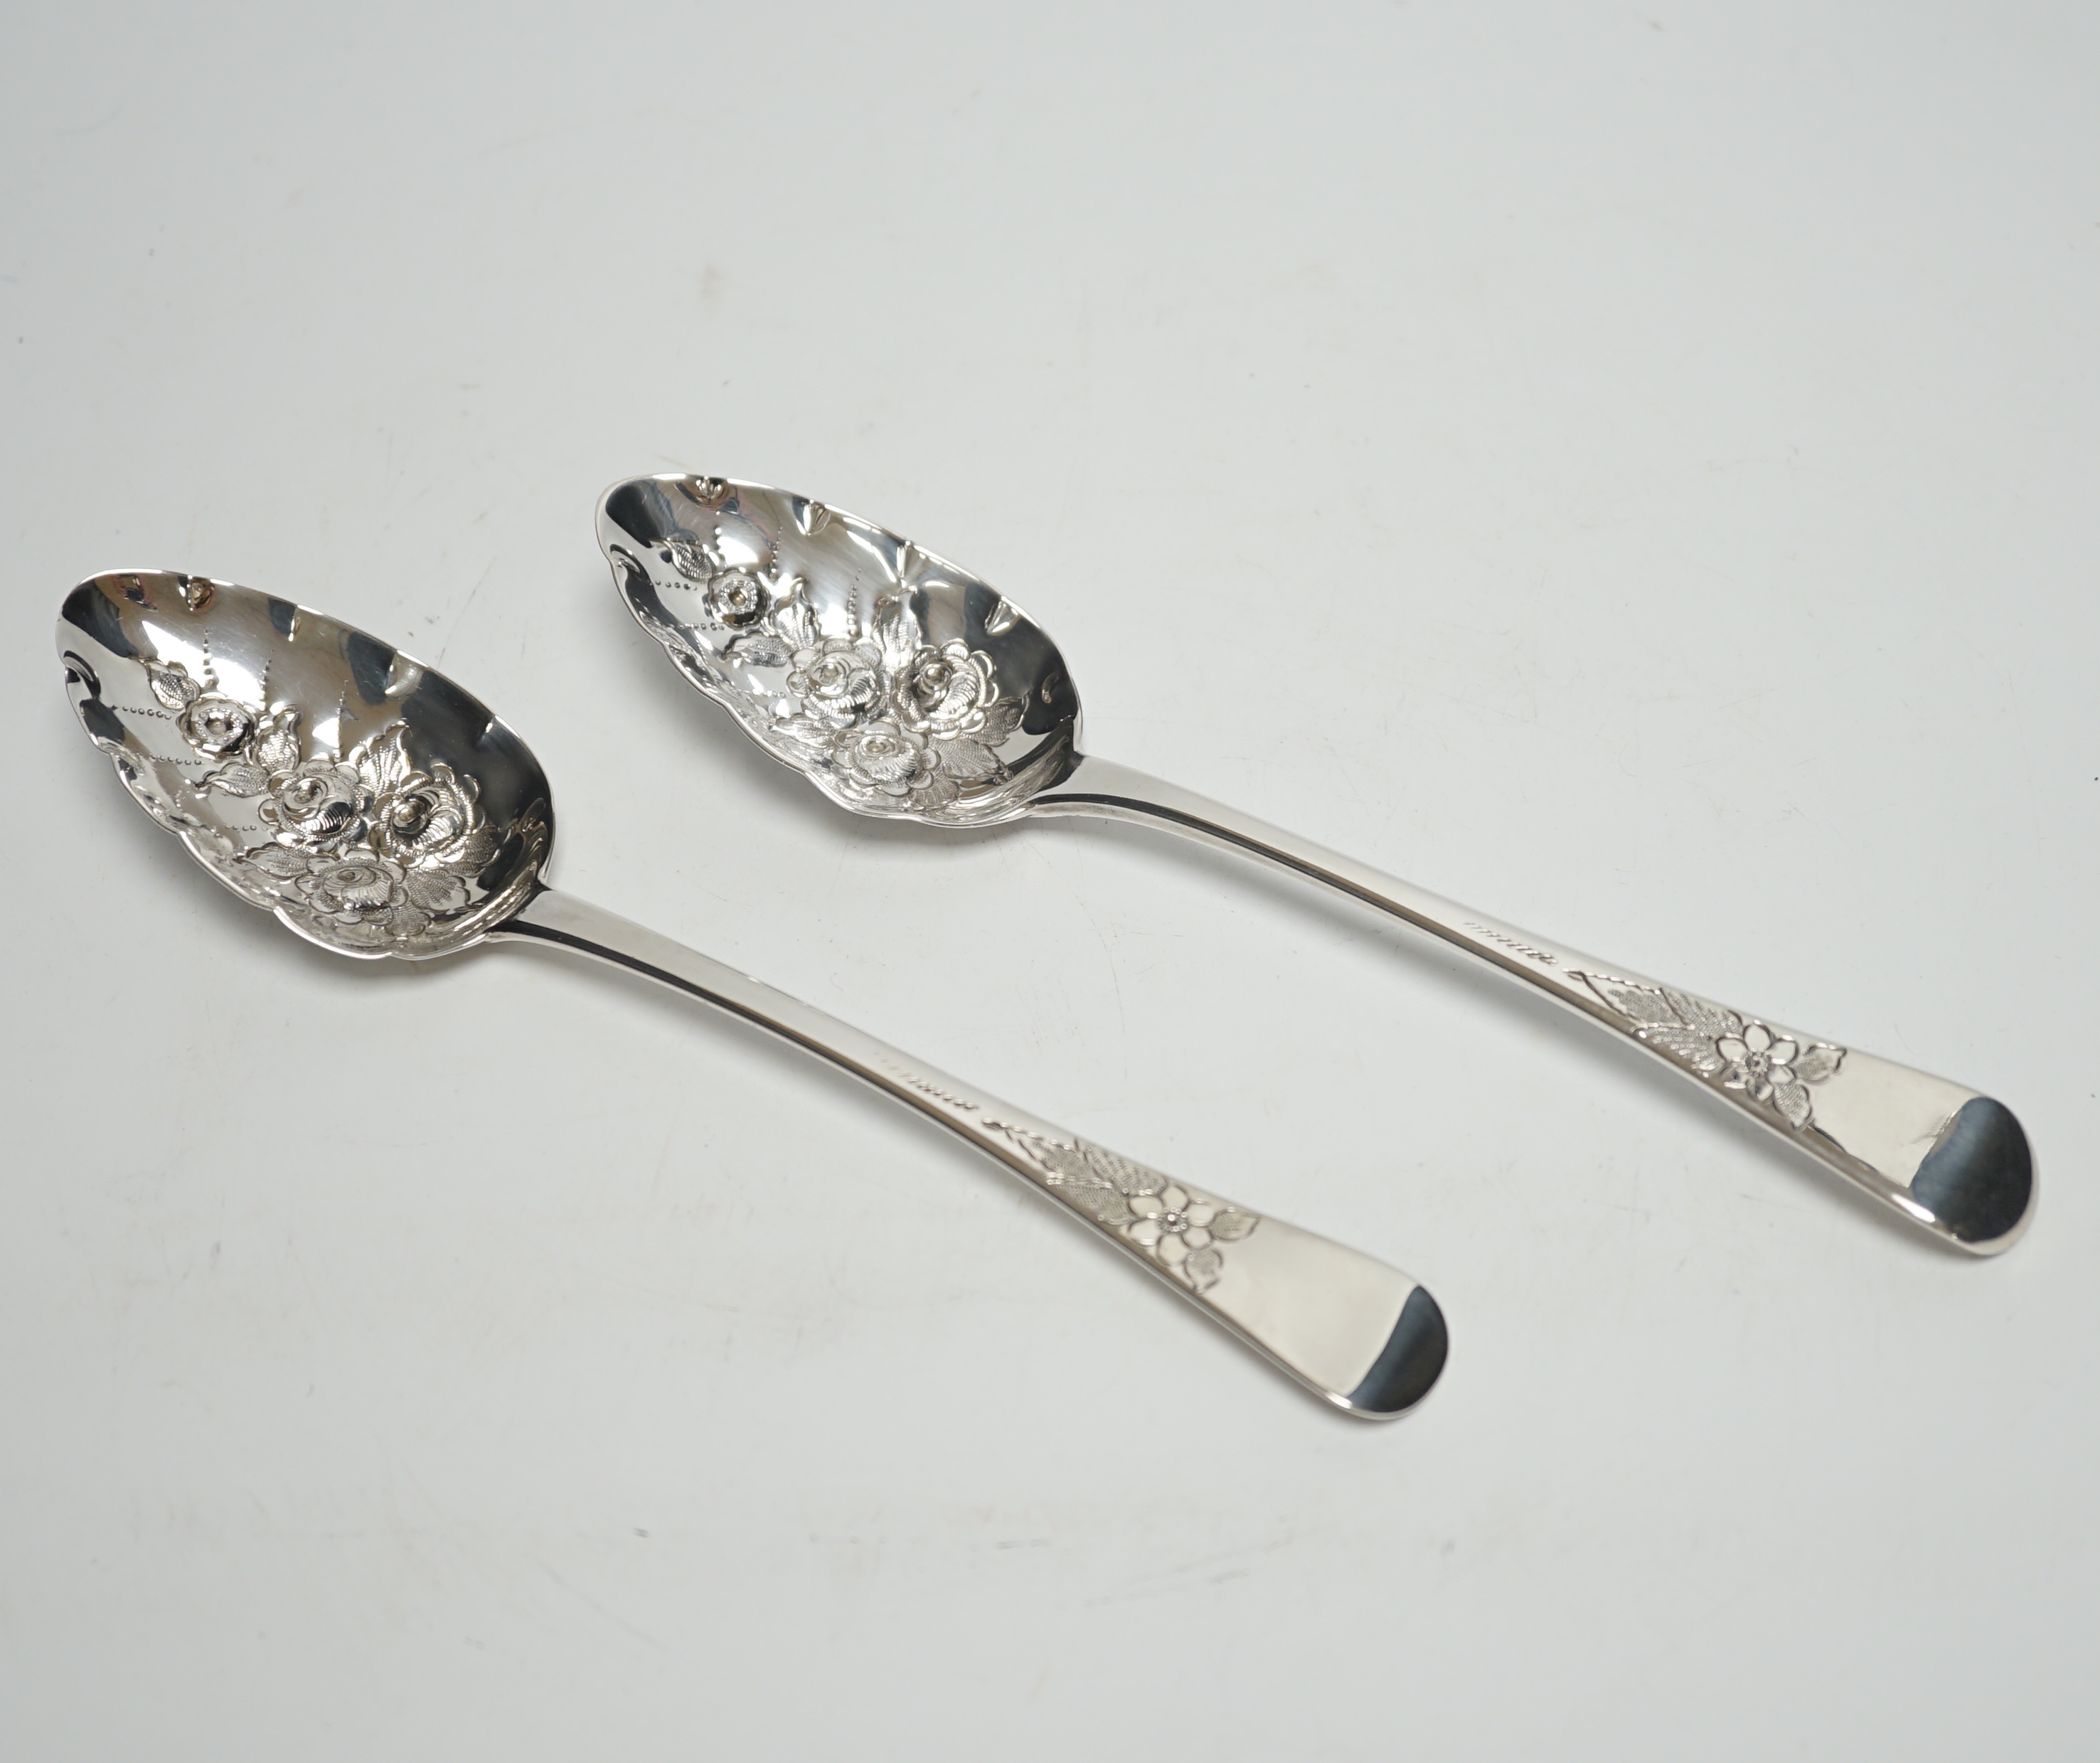 A pair of George III Old English pattern 'berry' spoons, Thomas Wilkes Barker, London, 1812, 22.3cm                                                                                                                         